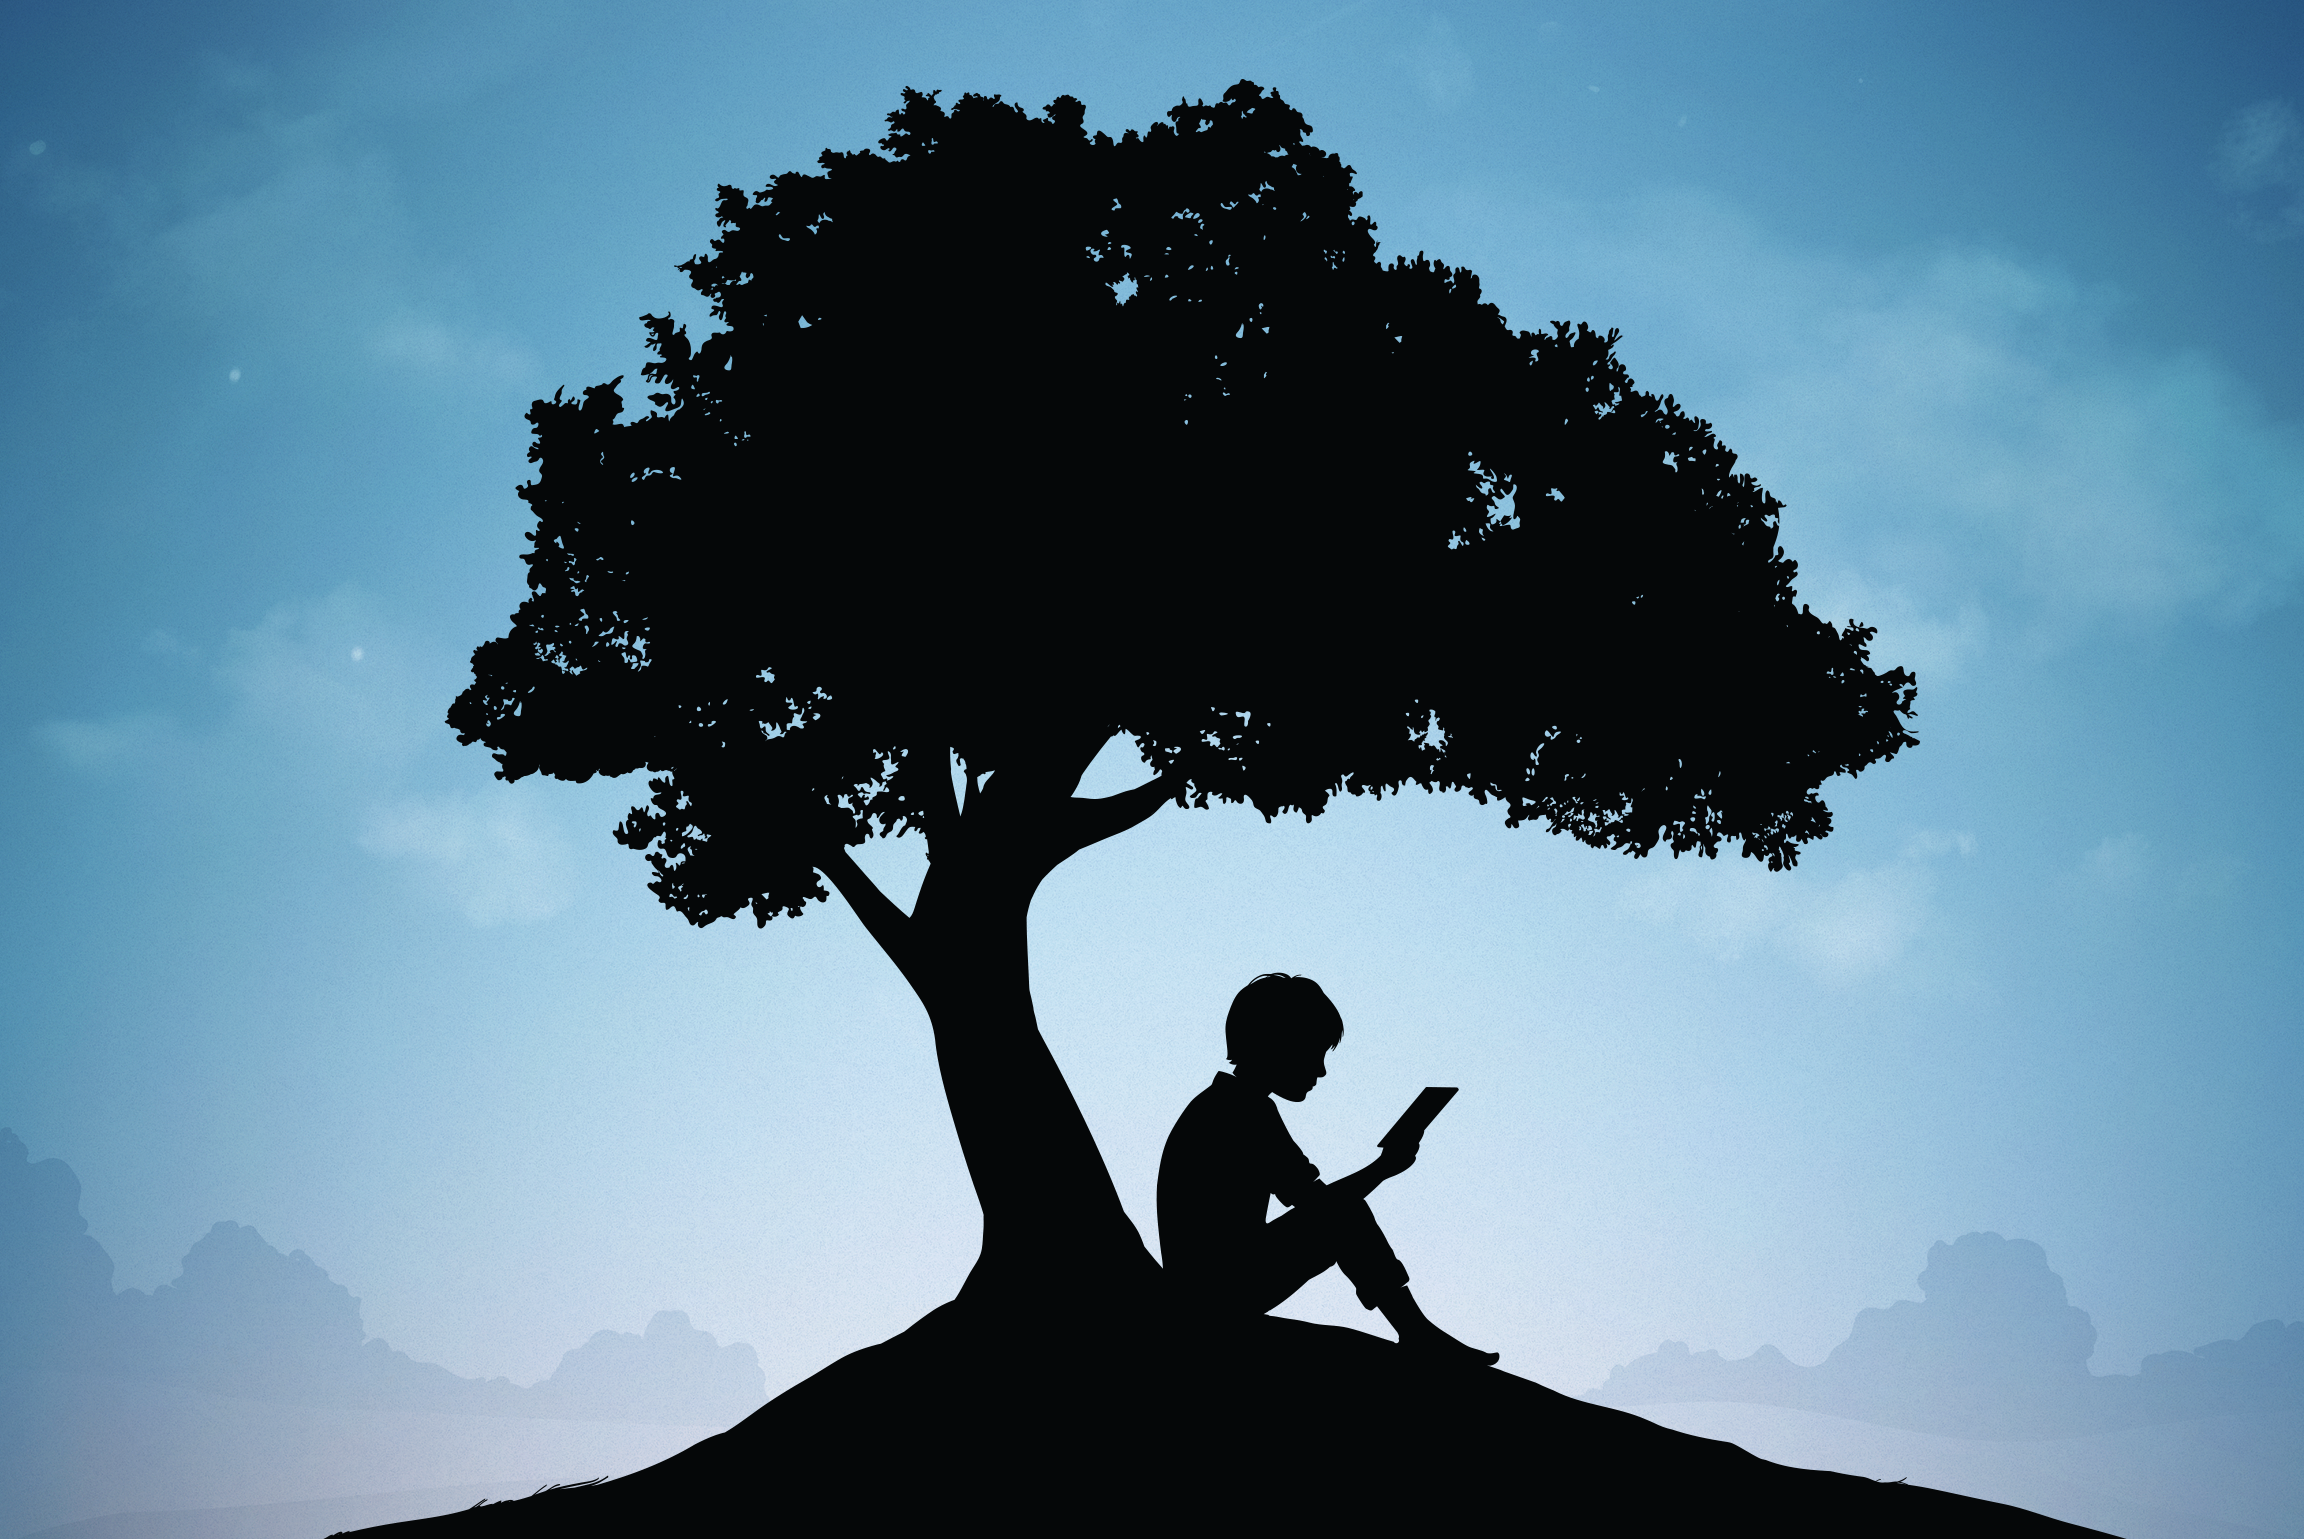 silhouette of boy reading under tree